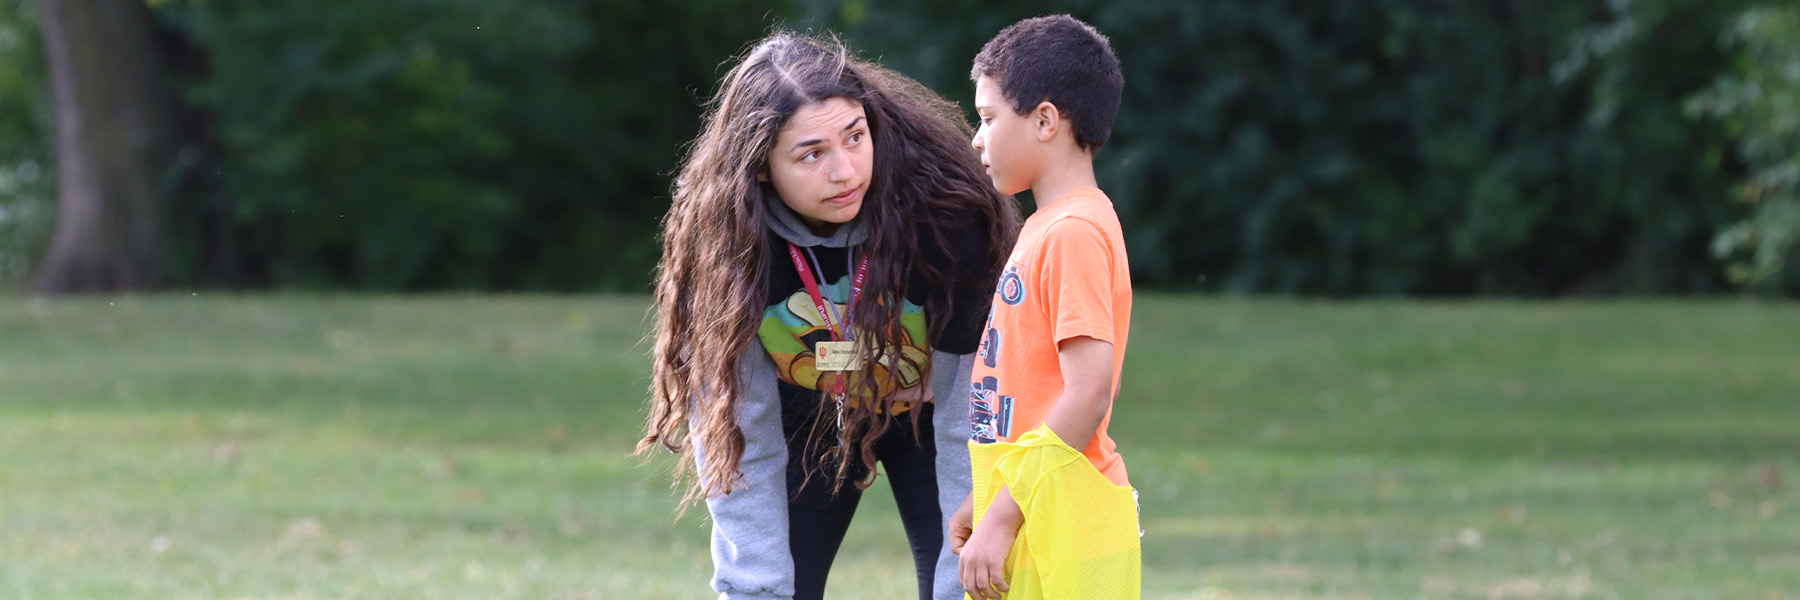 A female student coaching a young boy